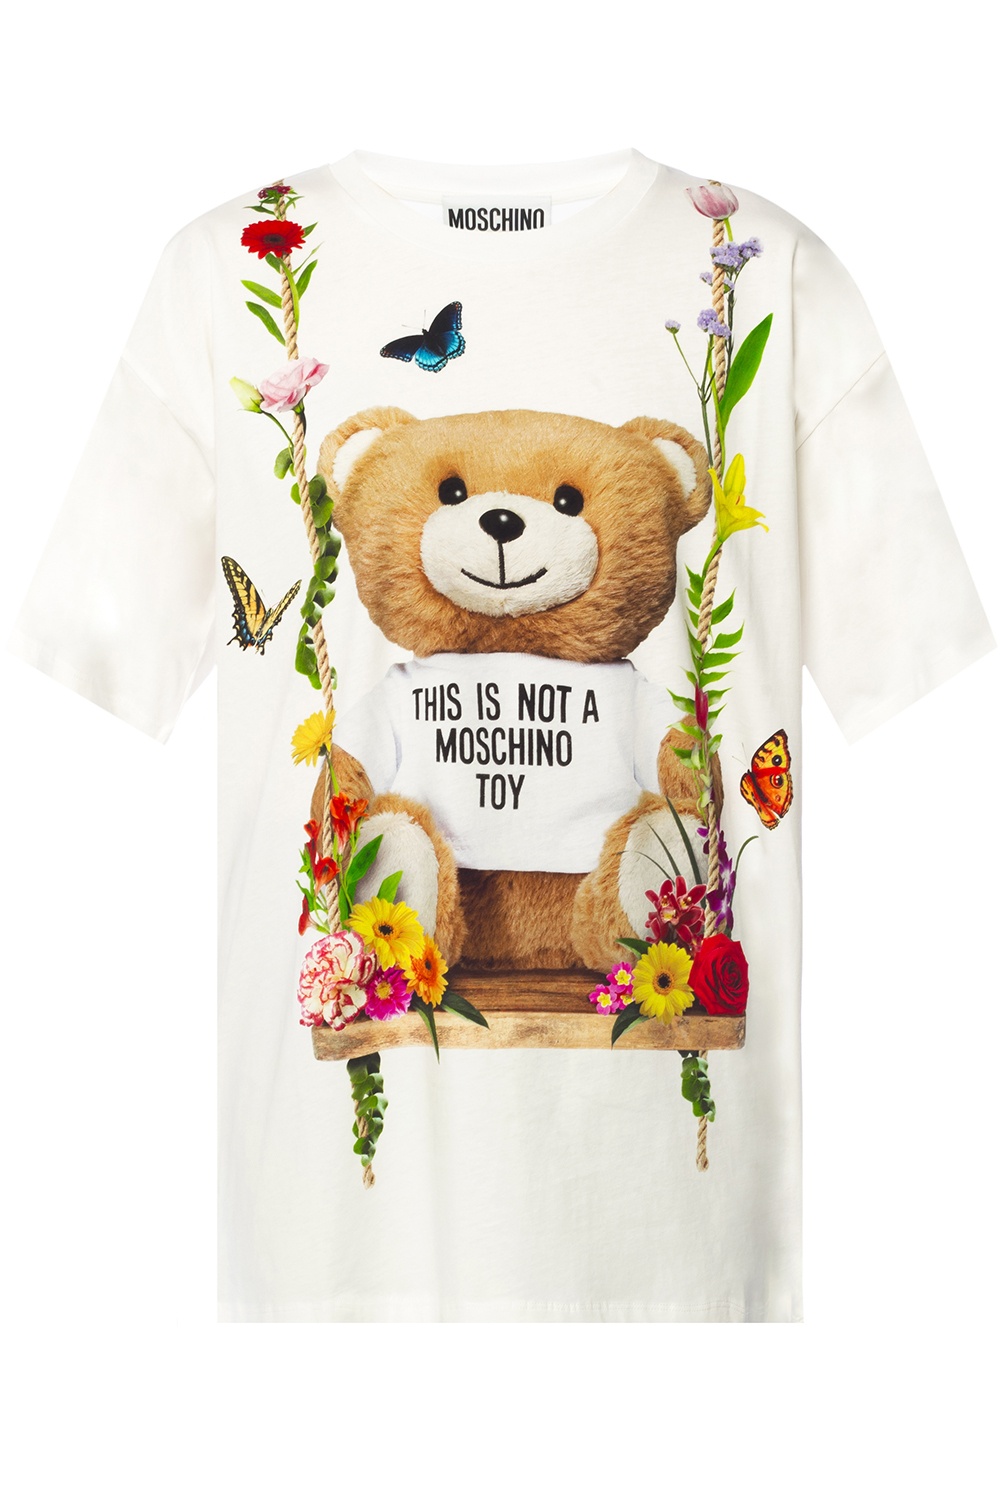 moschino this is not a toy shirt